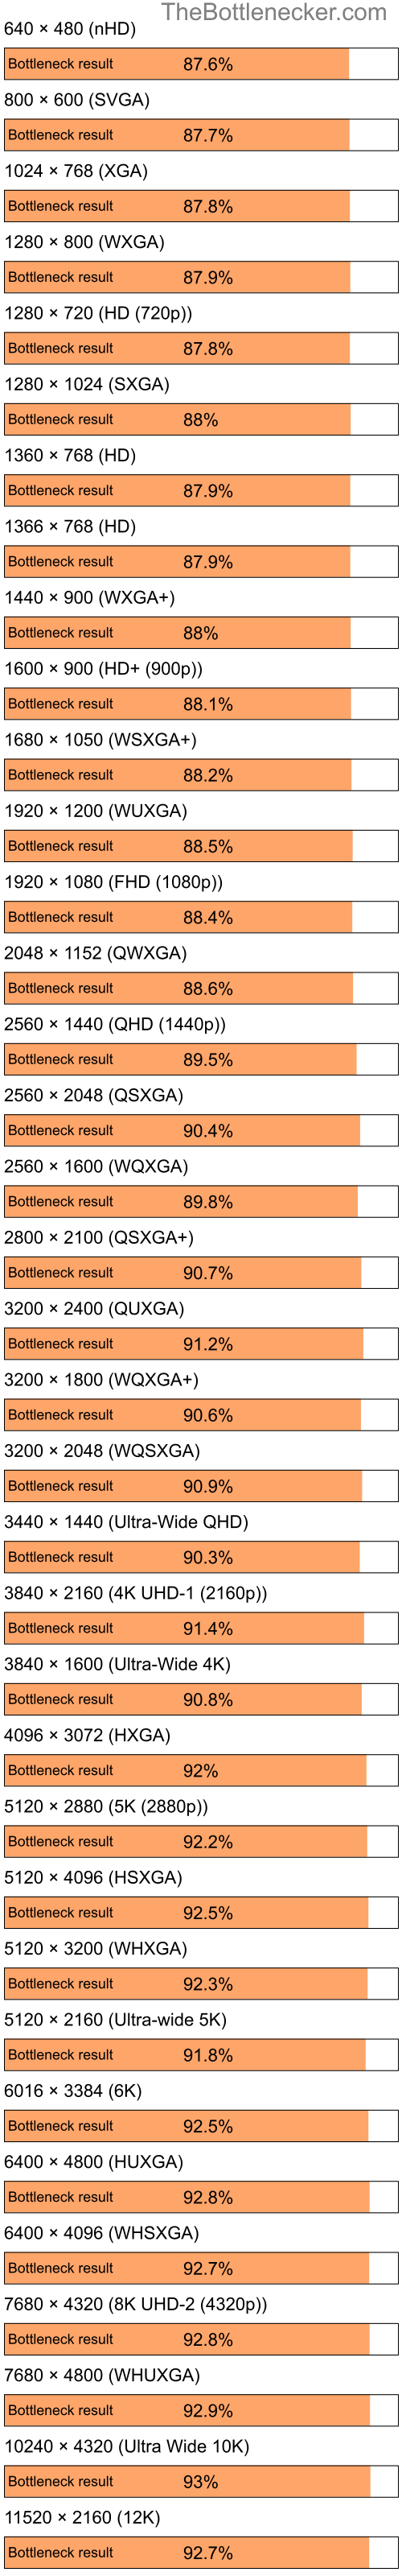 Bottleneck results by resolution for Intel Celeron M and NVIDIA MX 400 in Processor Intense Tasks